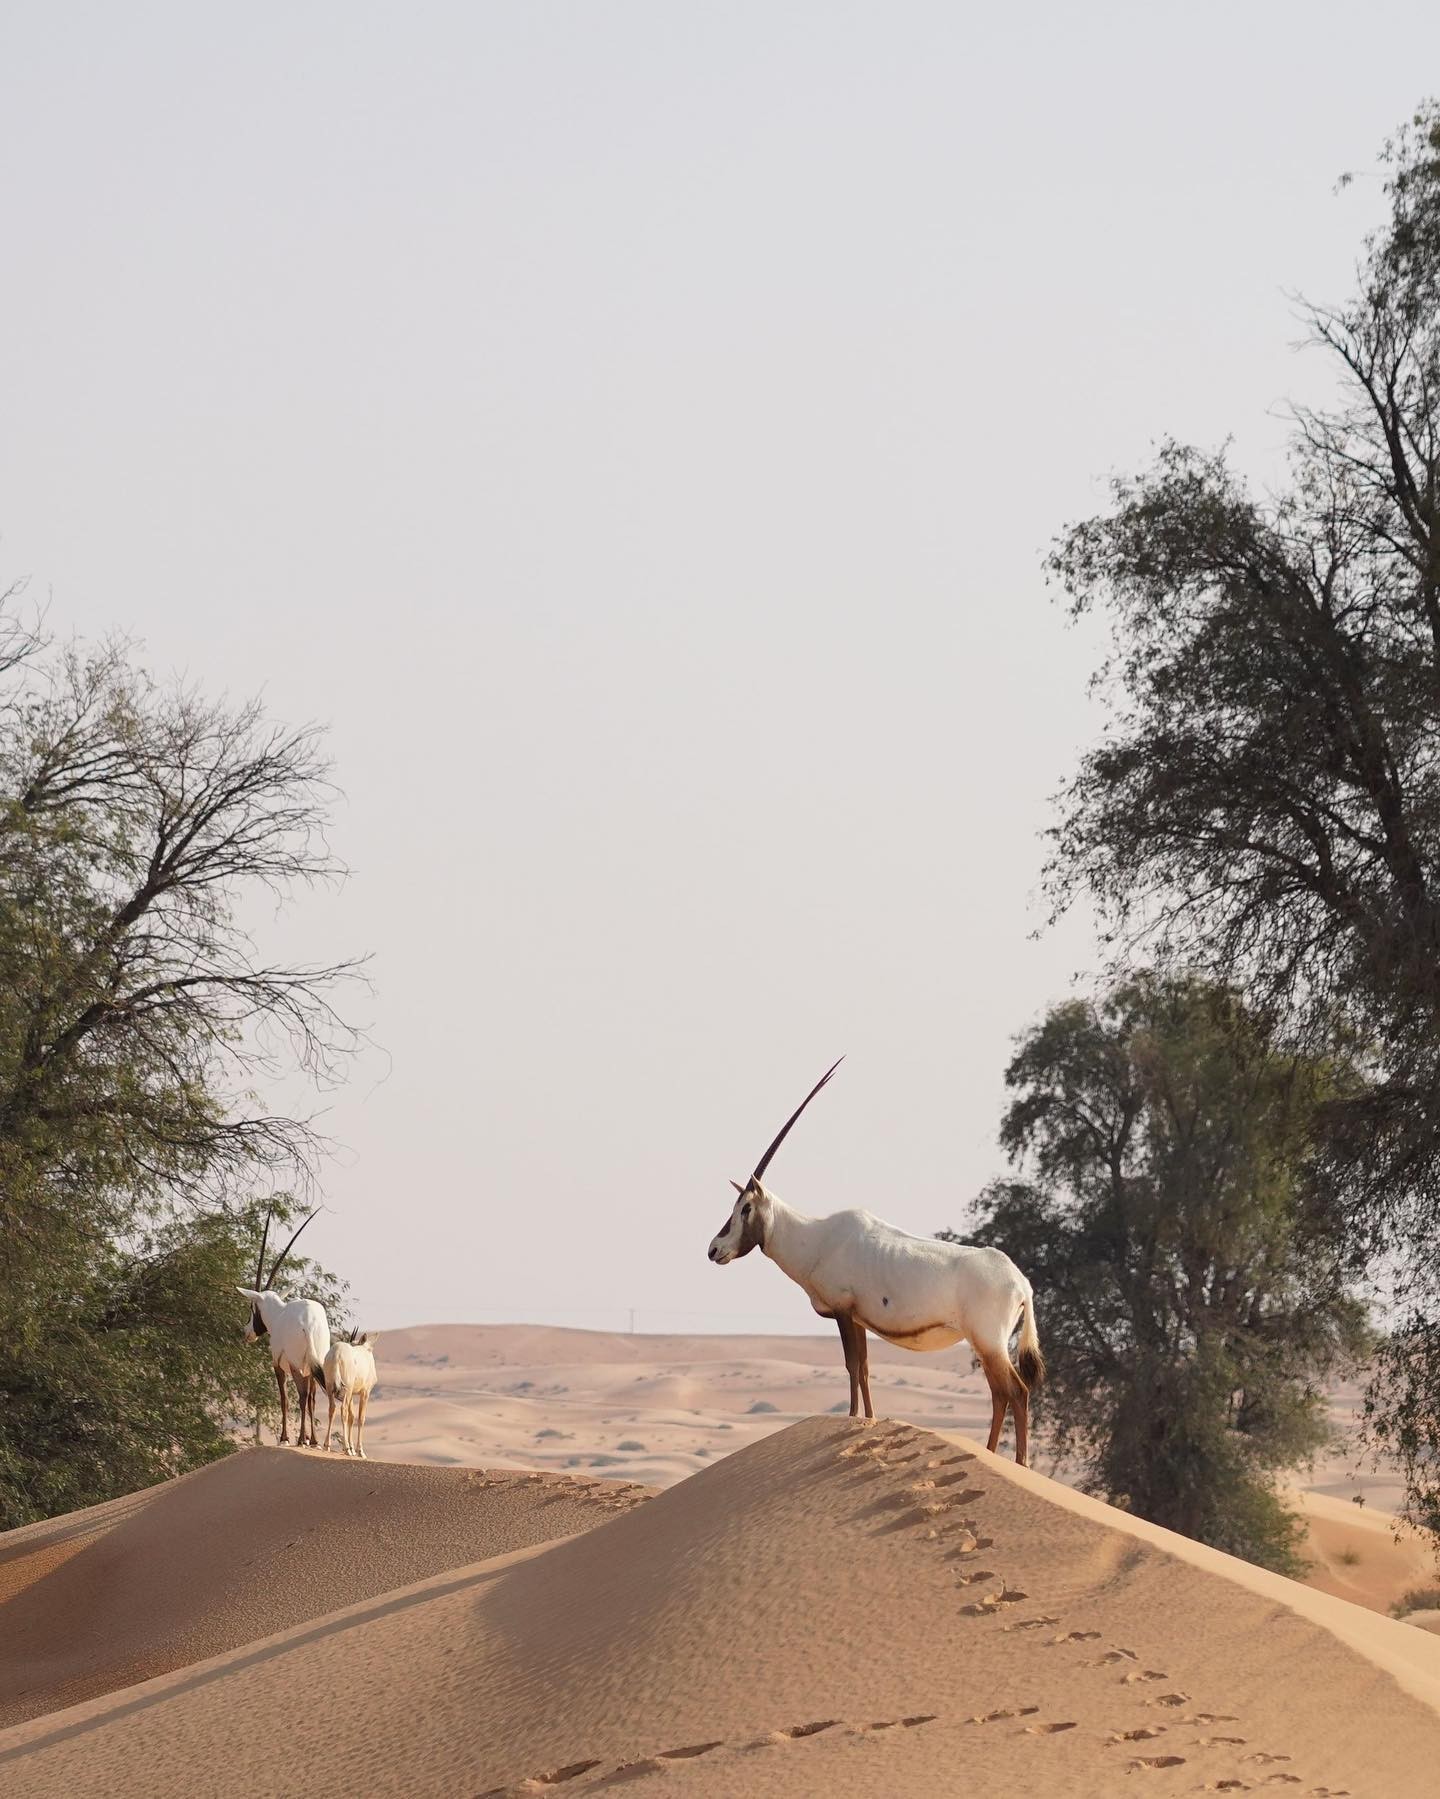 Wildlife Encounters: Platinum Heritage's desert camp is located within the Dubai Desert Conservation Reserve, home to a diverse range of flora and fauna. 